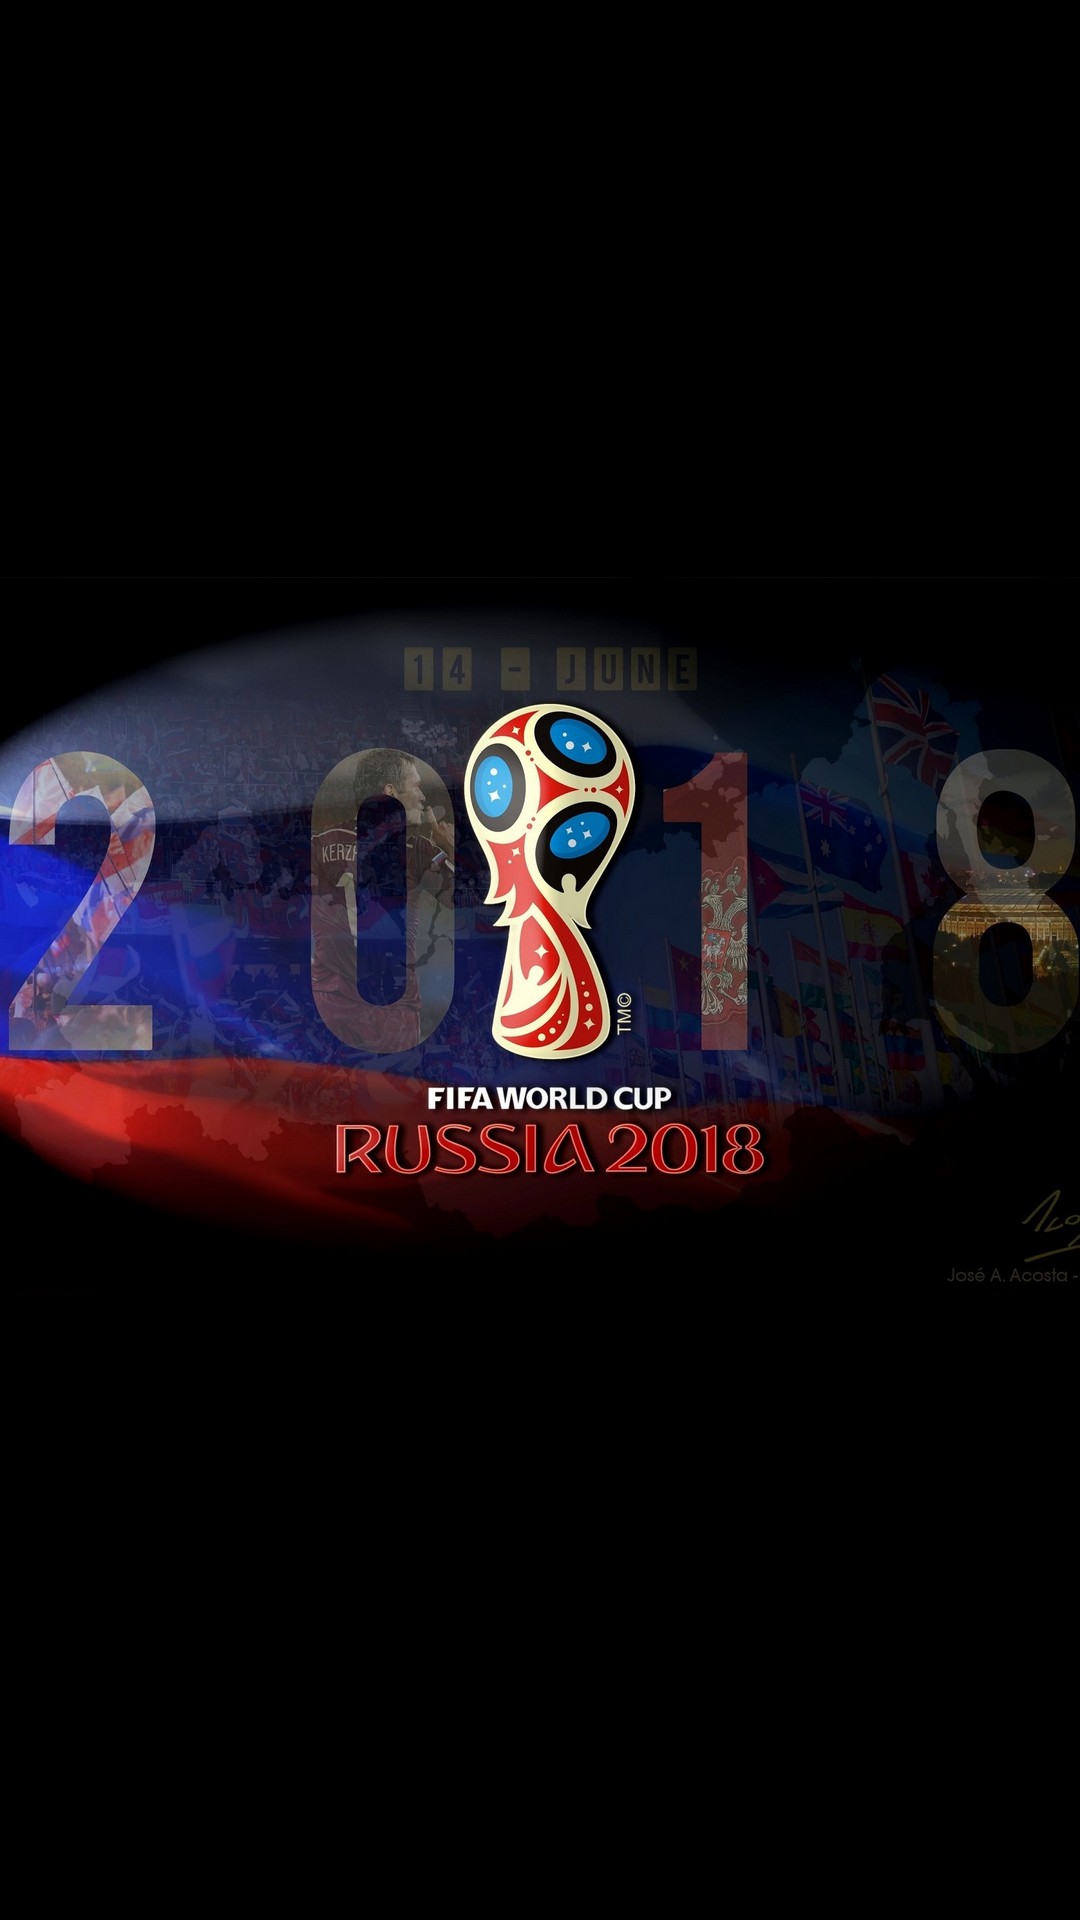 2018 World Cup Wallpaper iPhone resolution 1080x1920